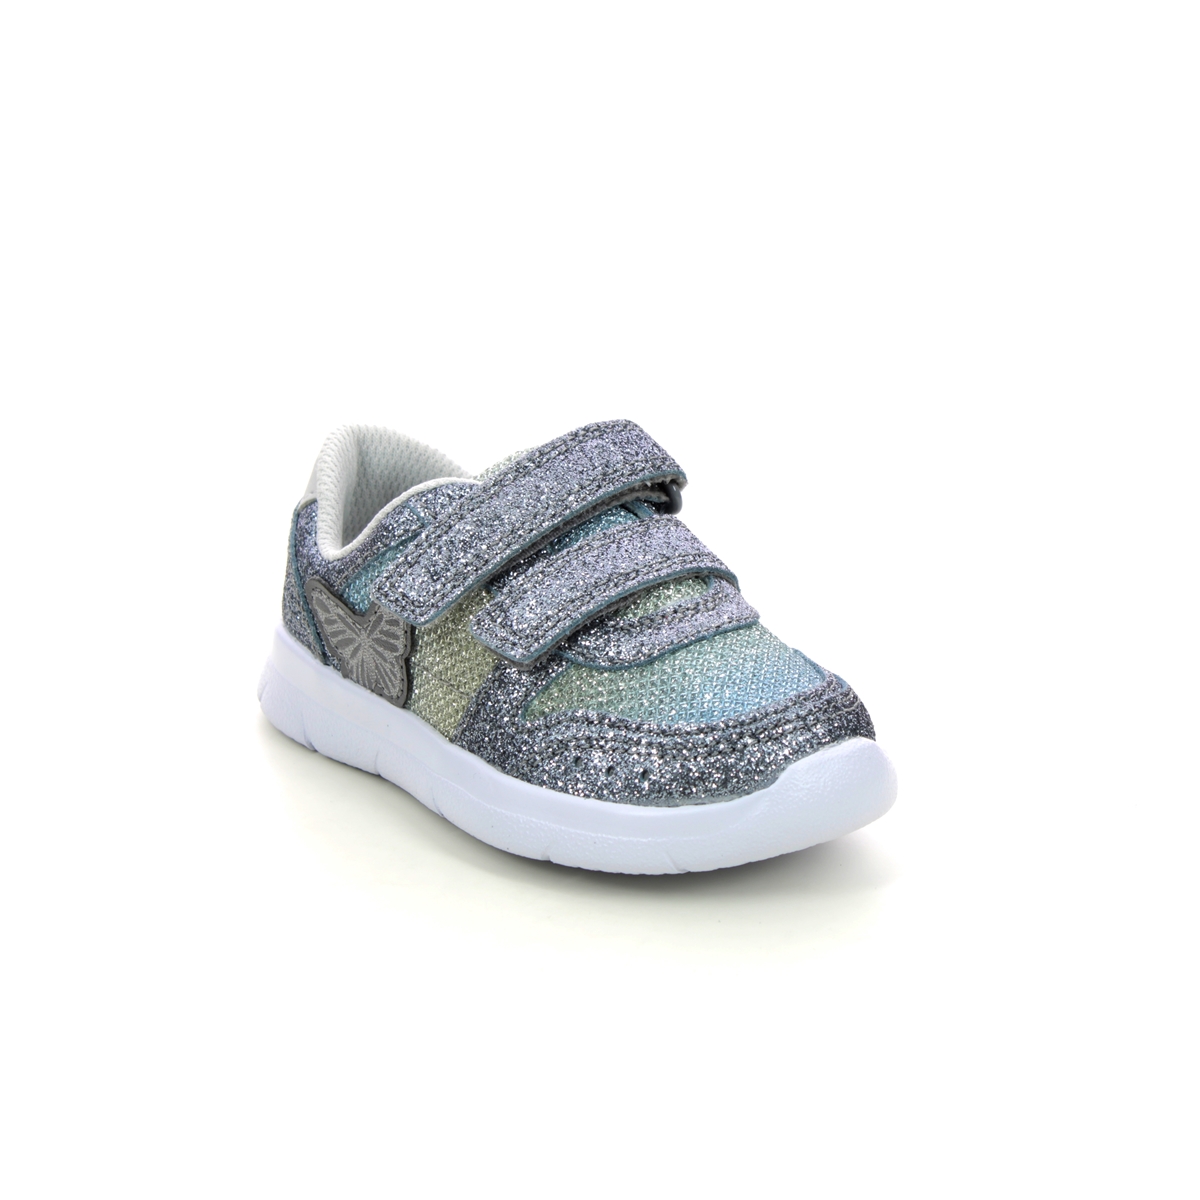 Clarks Ath Wing T Metallic Kids Toddler Girls Trainers 623197G In Size 5.5 In Plain Metallic G Width Fitting For kids